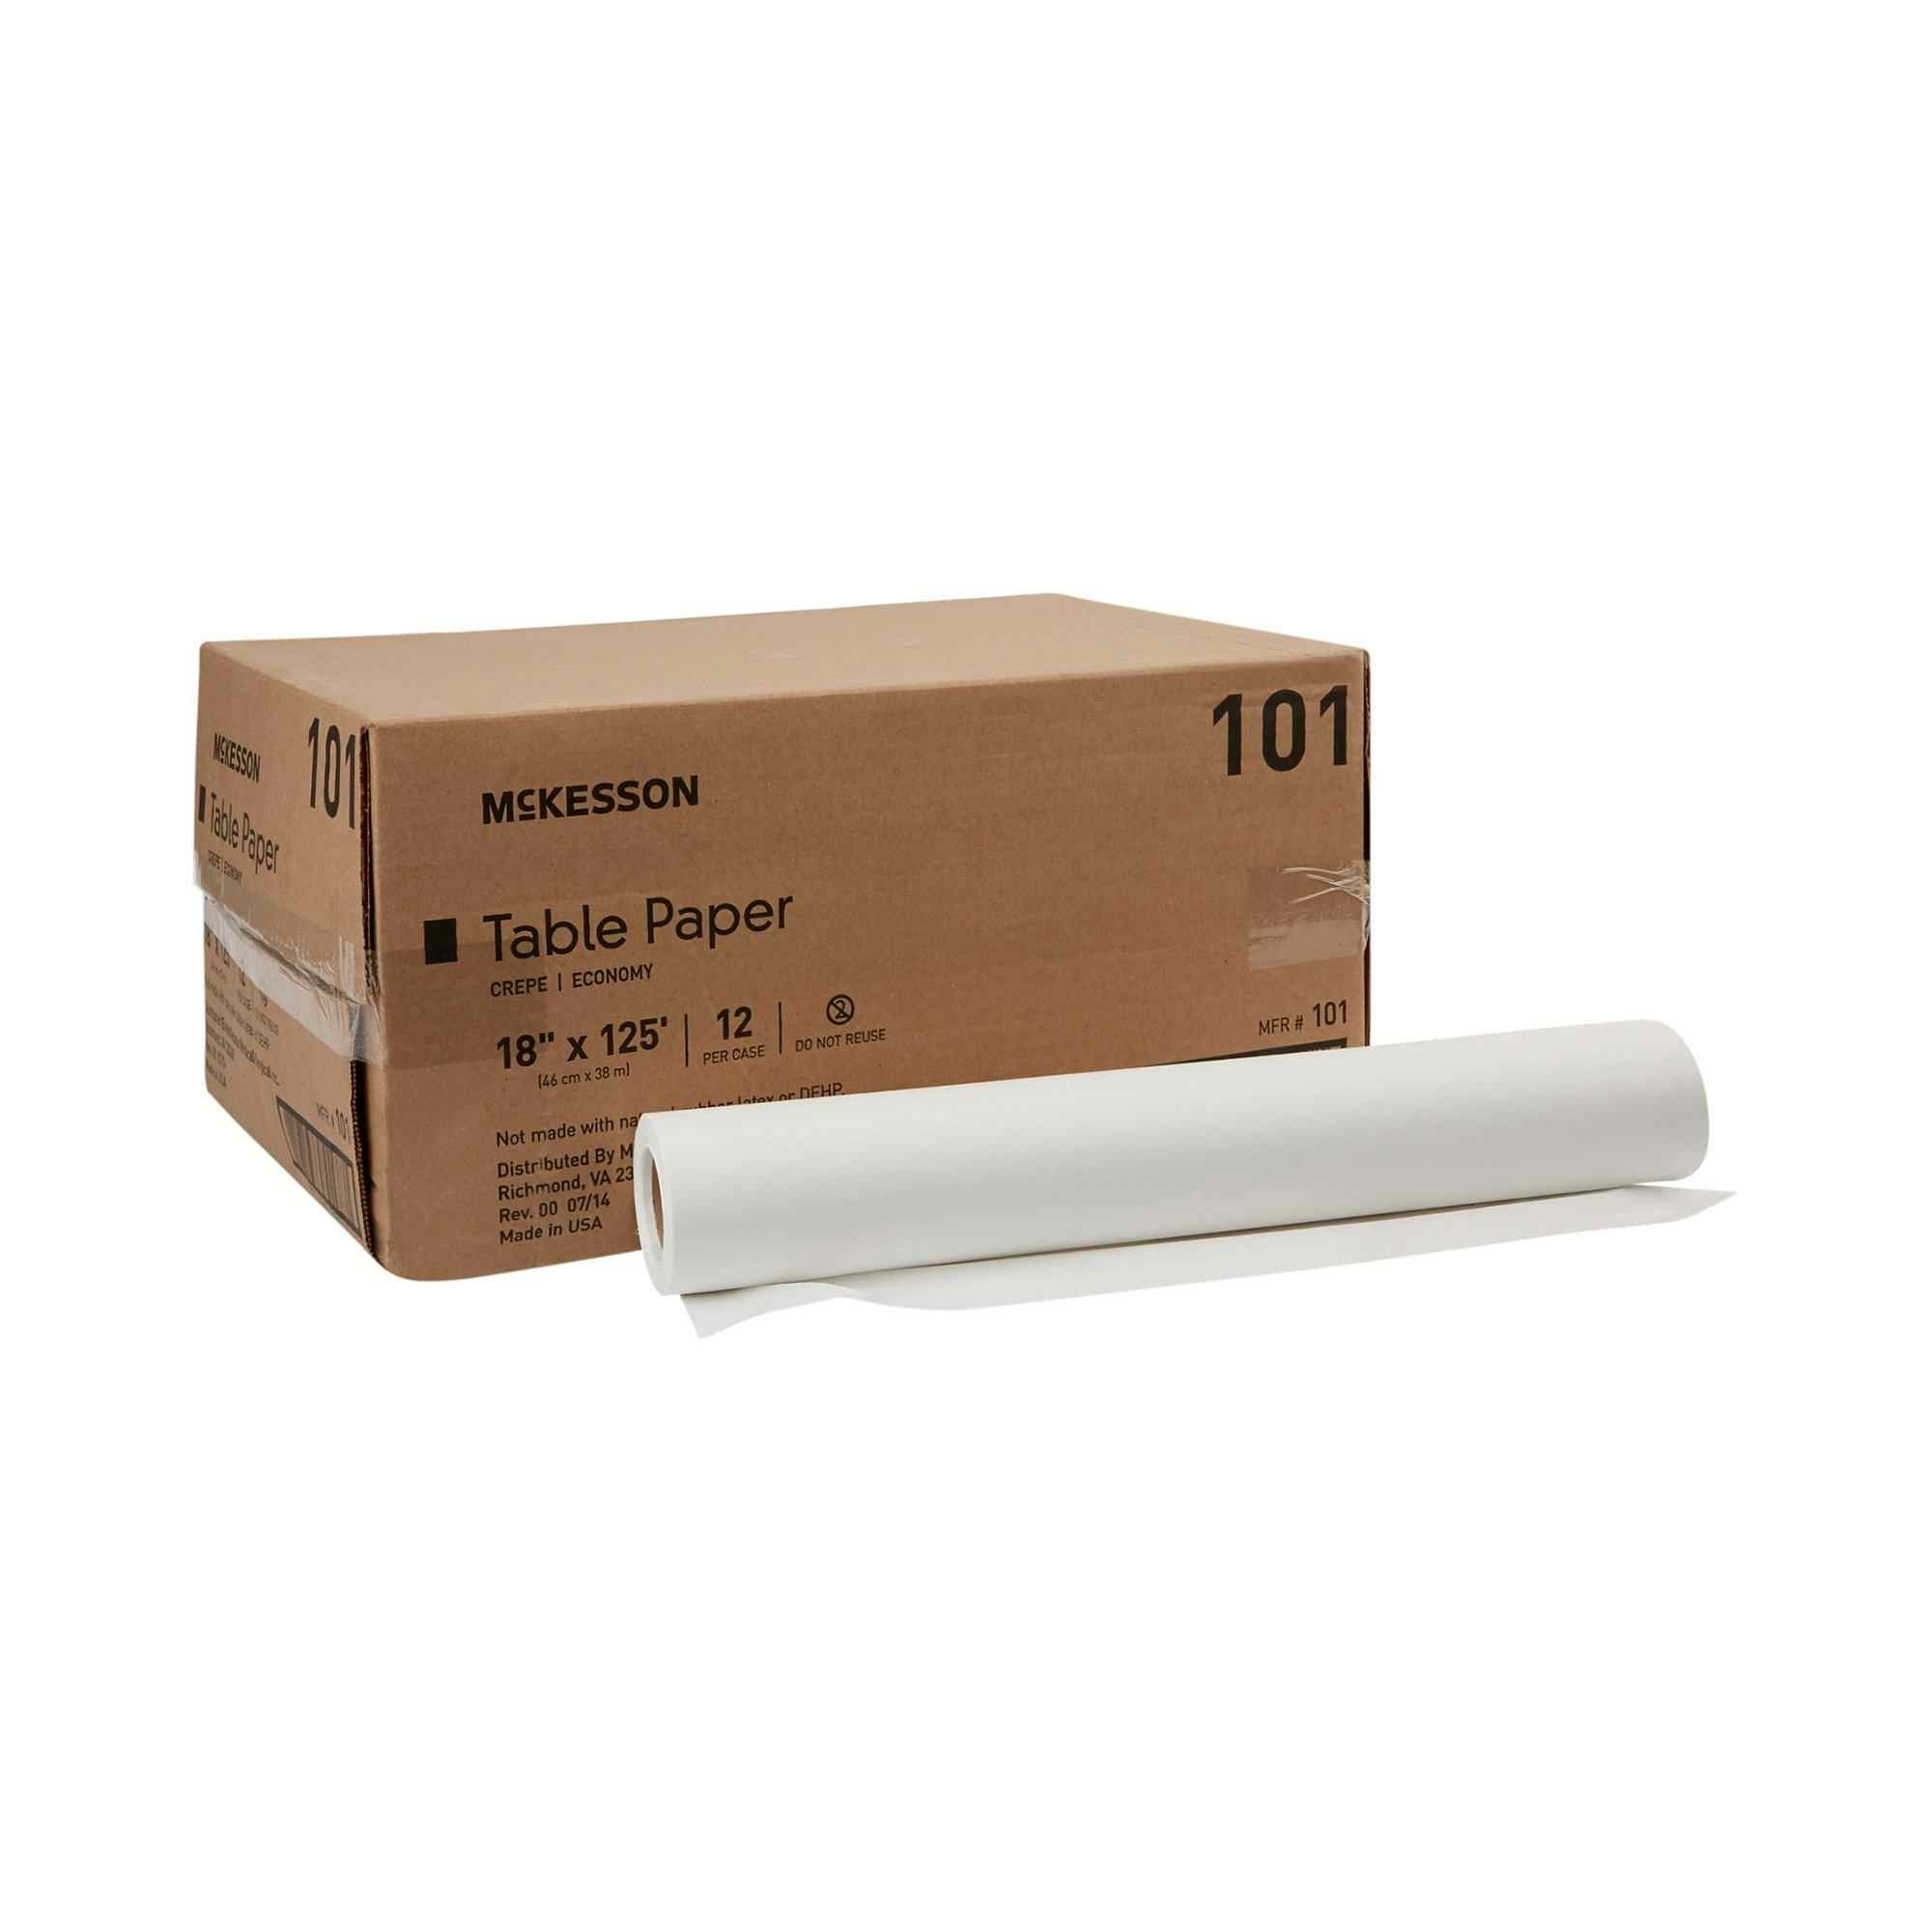 McKesson Crepe Table Paper, 18" X 125ft., 101, Case of 12